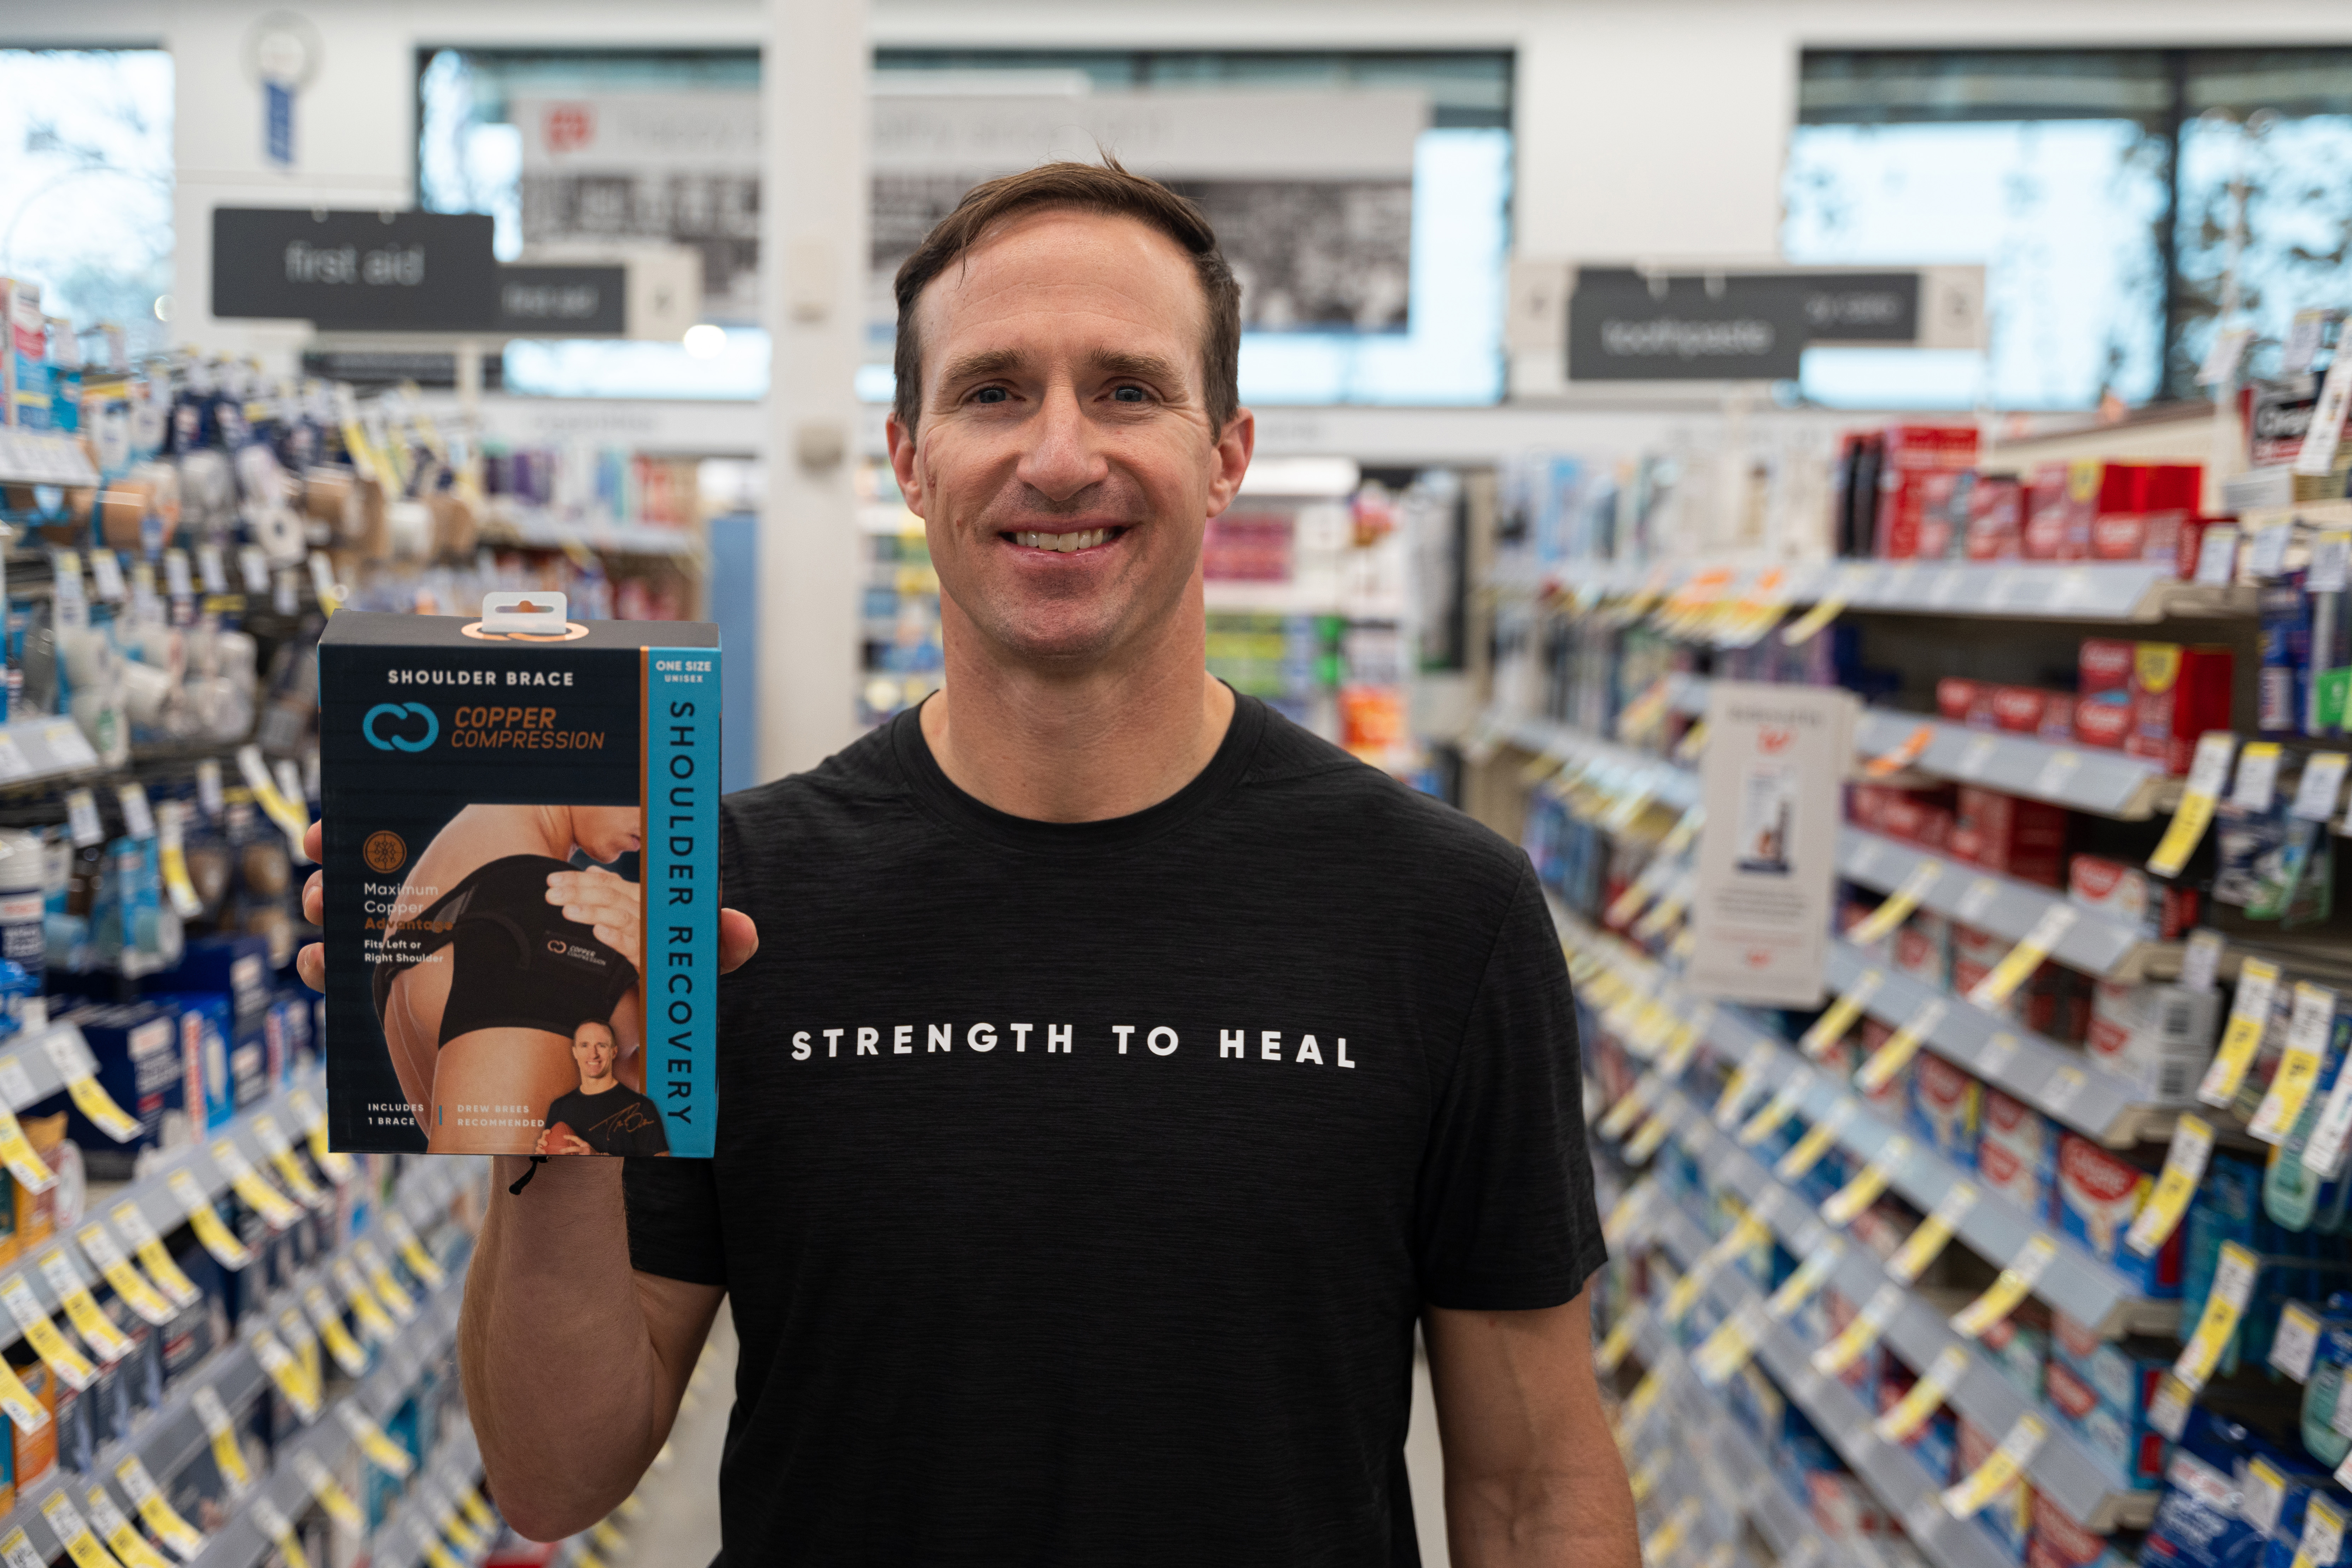 Drew Brees with the Copper Compression Recovery Shoulder Brace in the Support &amp; Braces aisle at his local Walgreens